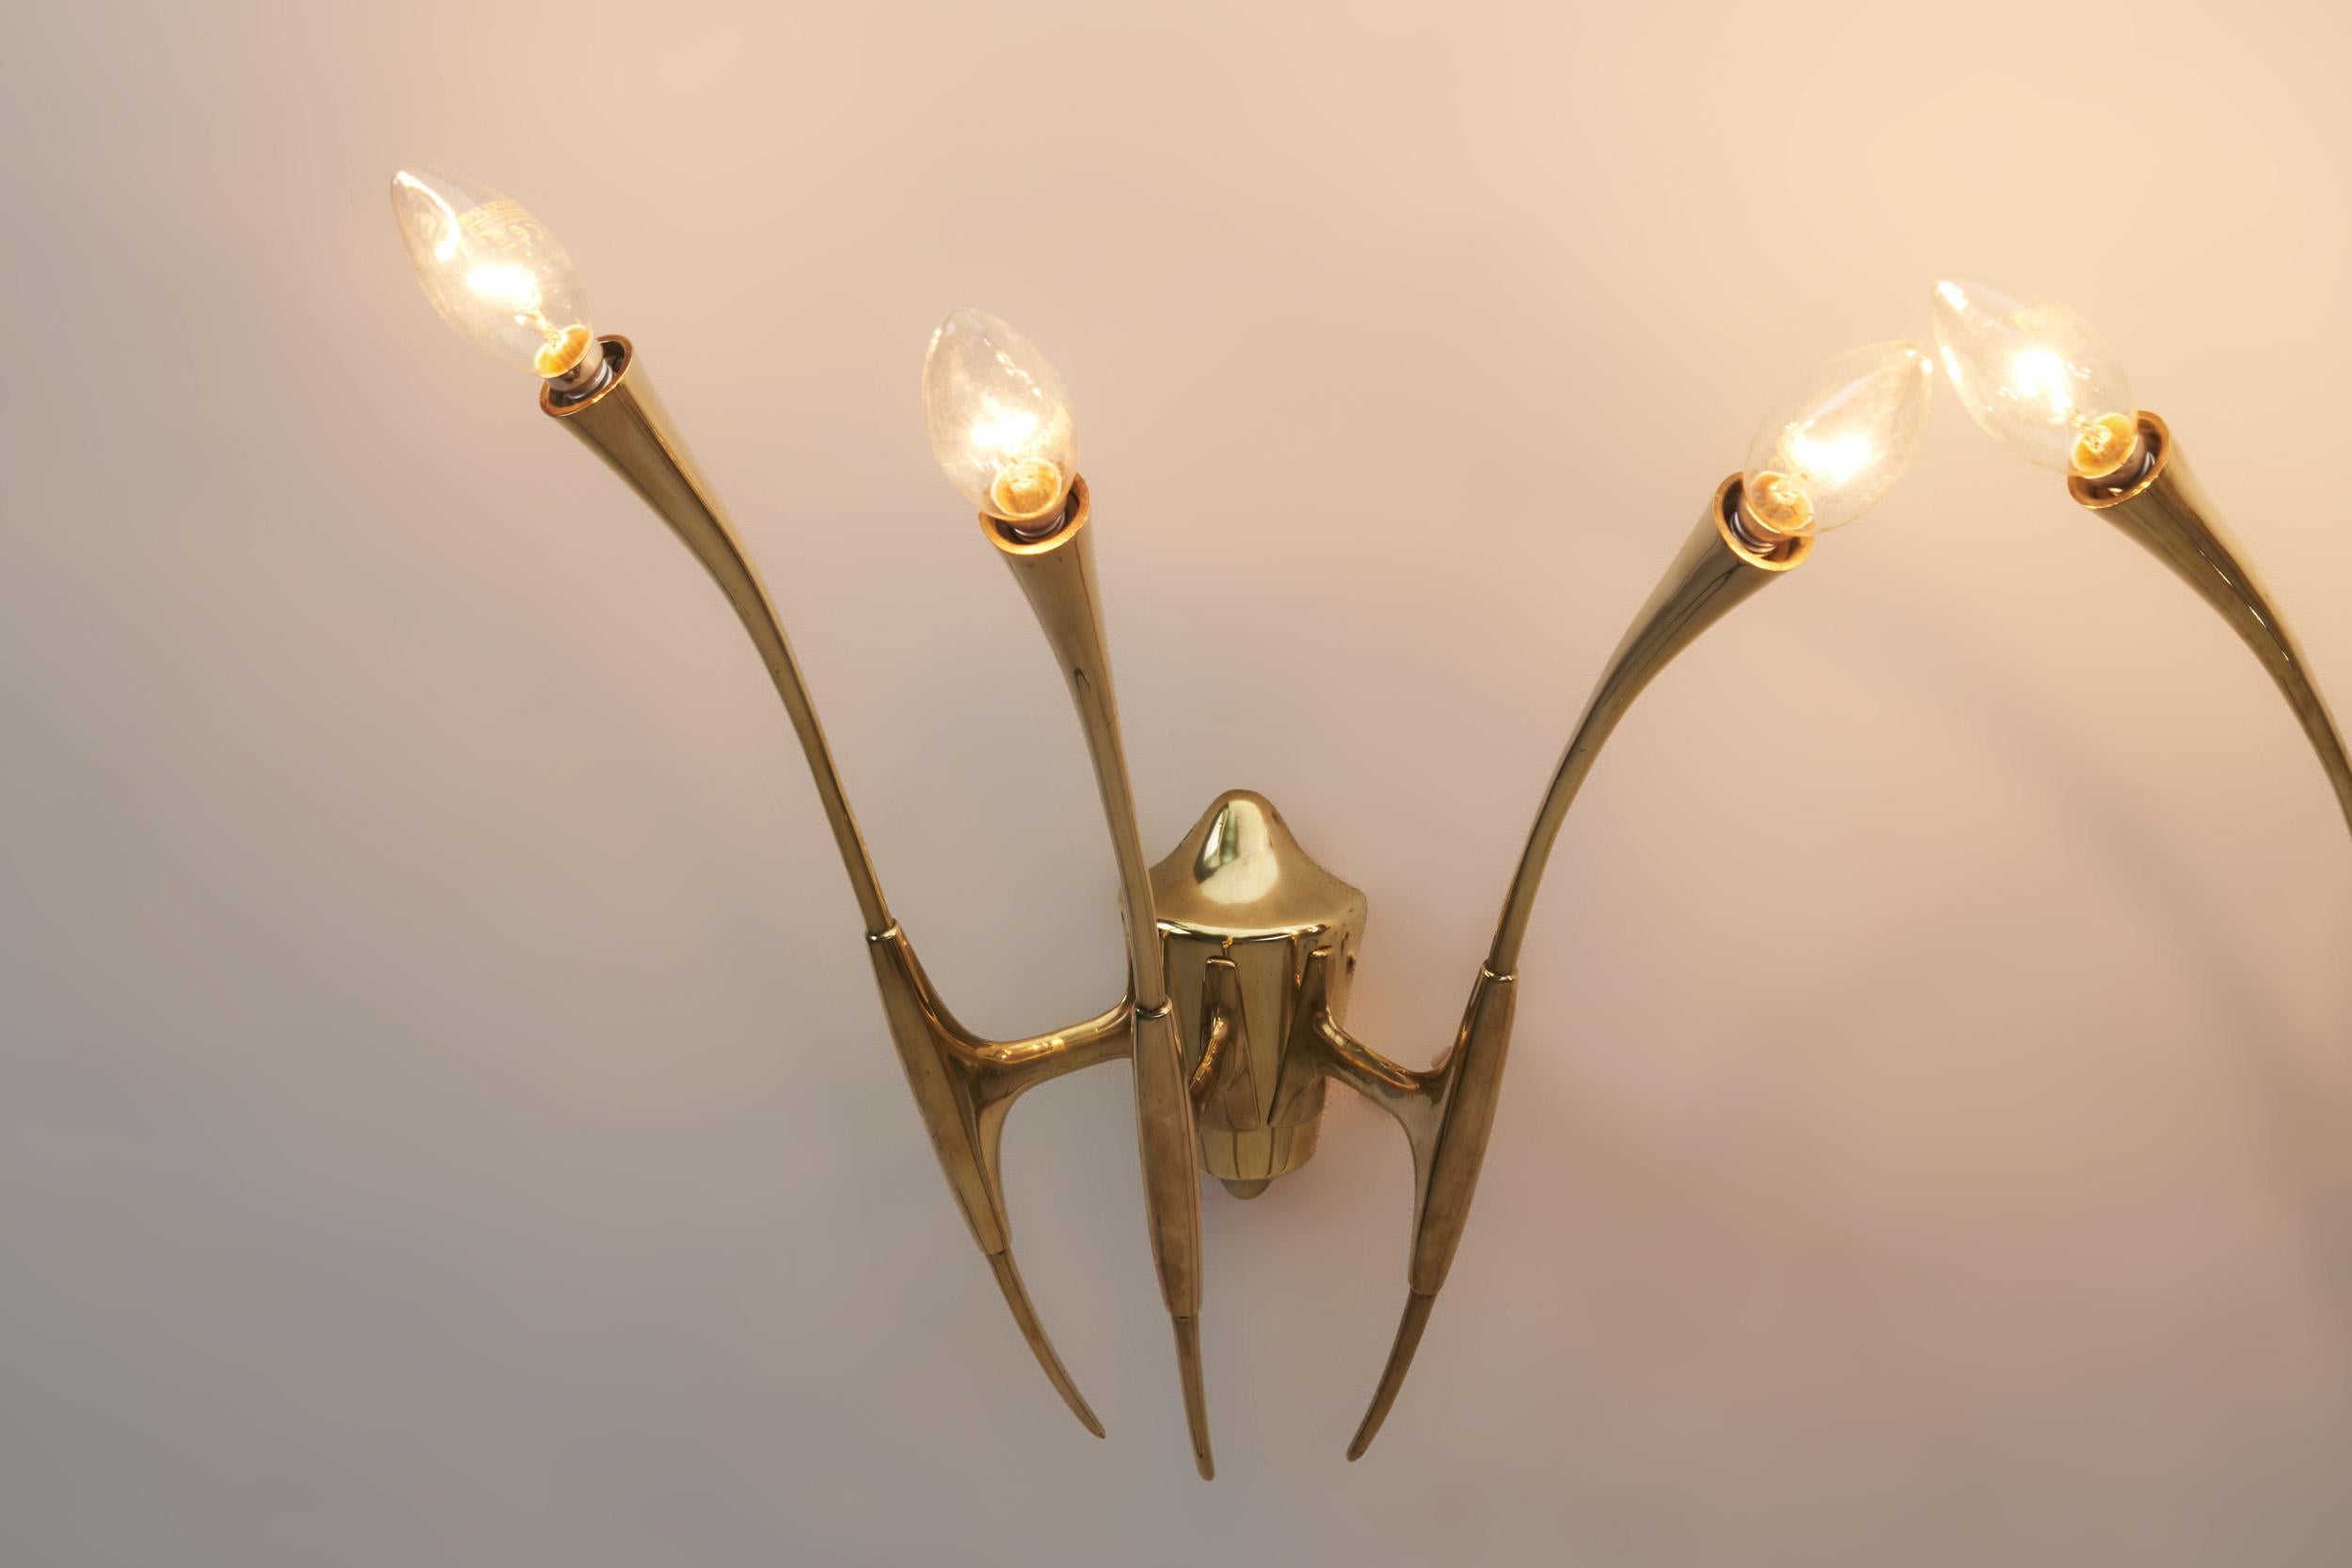 Oscar Torlasco Sculptural Brass Wall Lights for Lumi, Italy, 1950s For Sale 2